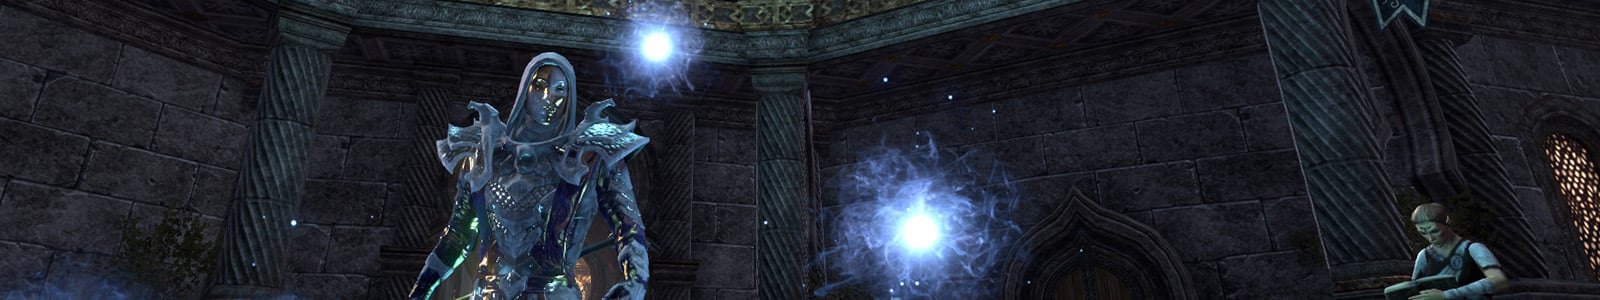 ESO Buffs and Debuffs - The Major and Minor System header